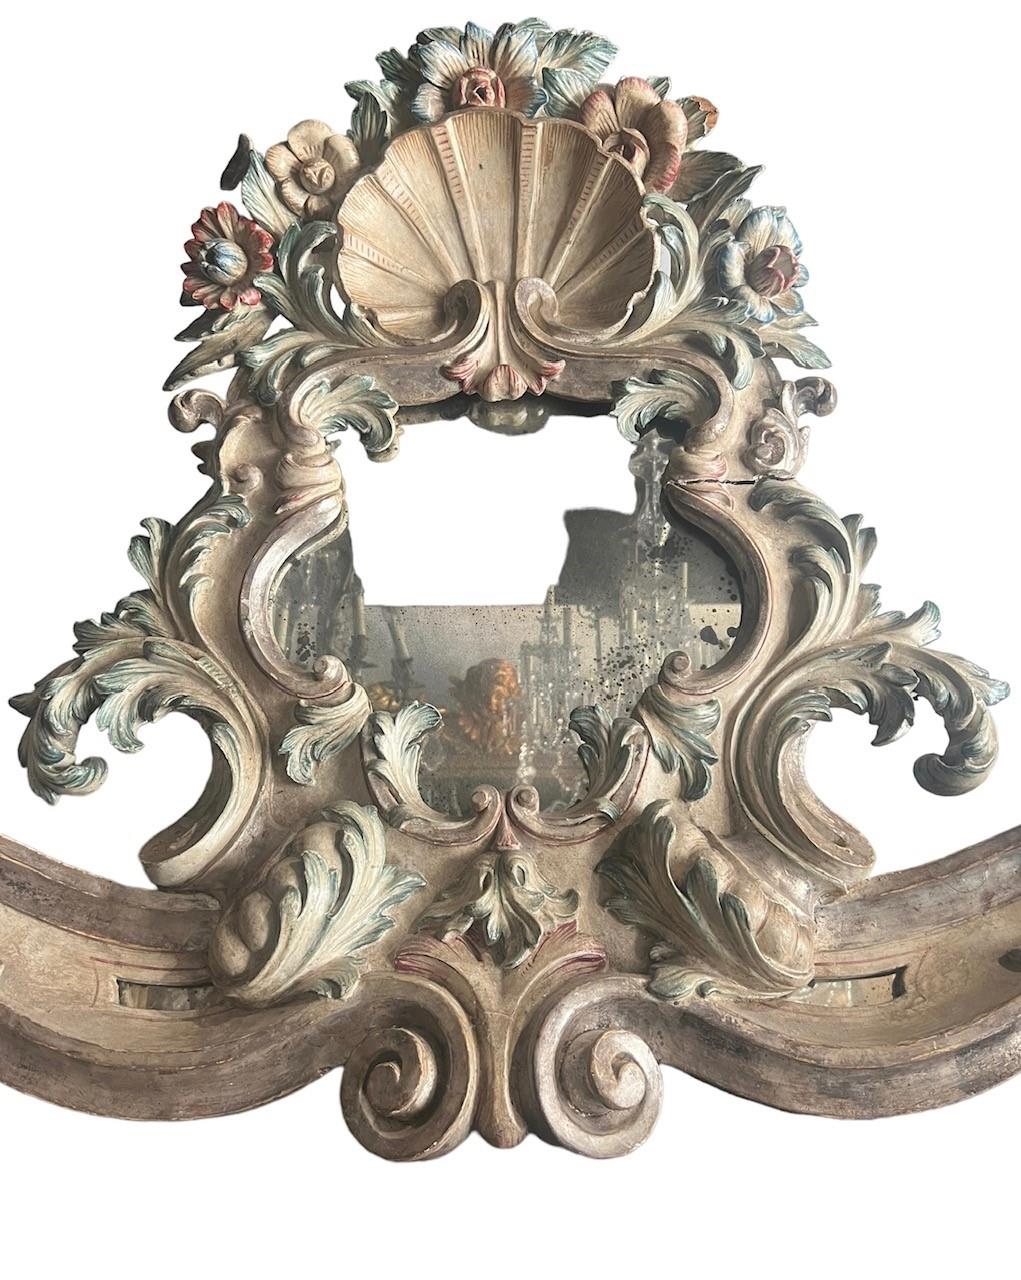 A VERY LARGE AND IMPRESSIVE 18TH CENTURY CARVED WOOD AND PAINTED ITALIAN VENETIAN ROCOCO MIRROR - Image 7 of 18